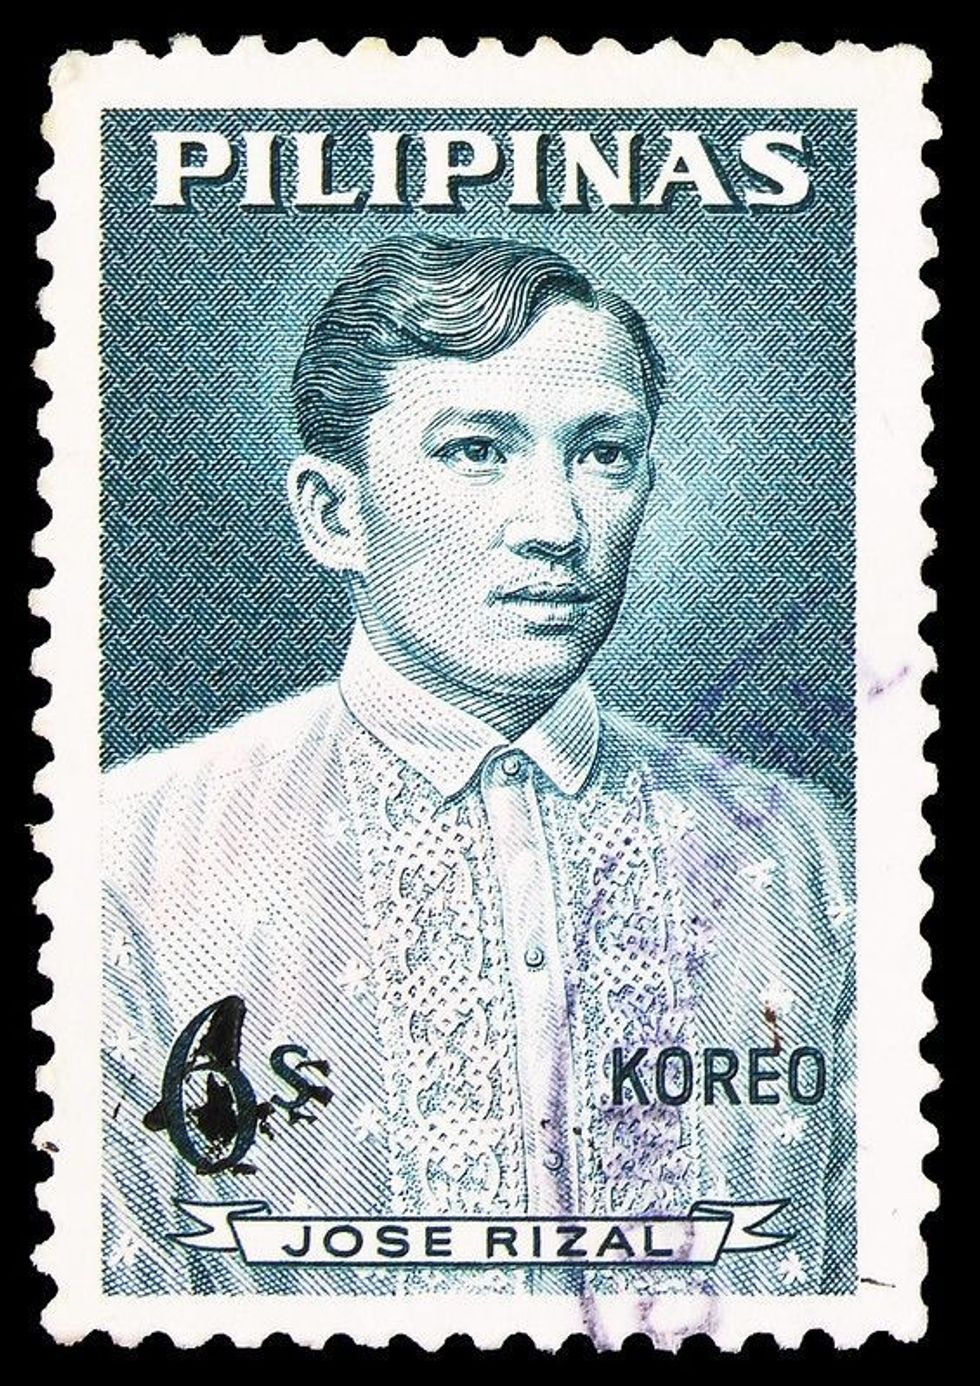 Read here the most popular Jose Rizal quotes and famous sayings to boost your confidence in leadership and nationalism.